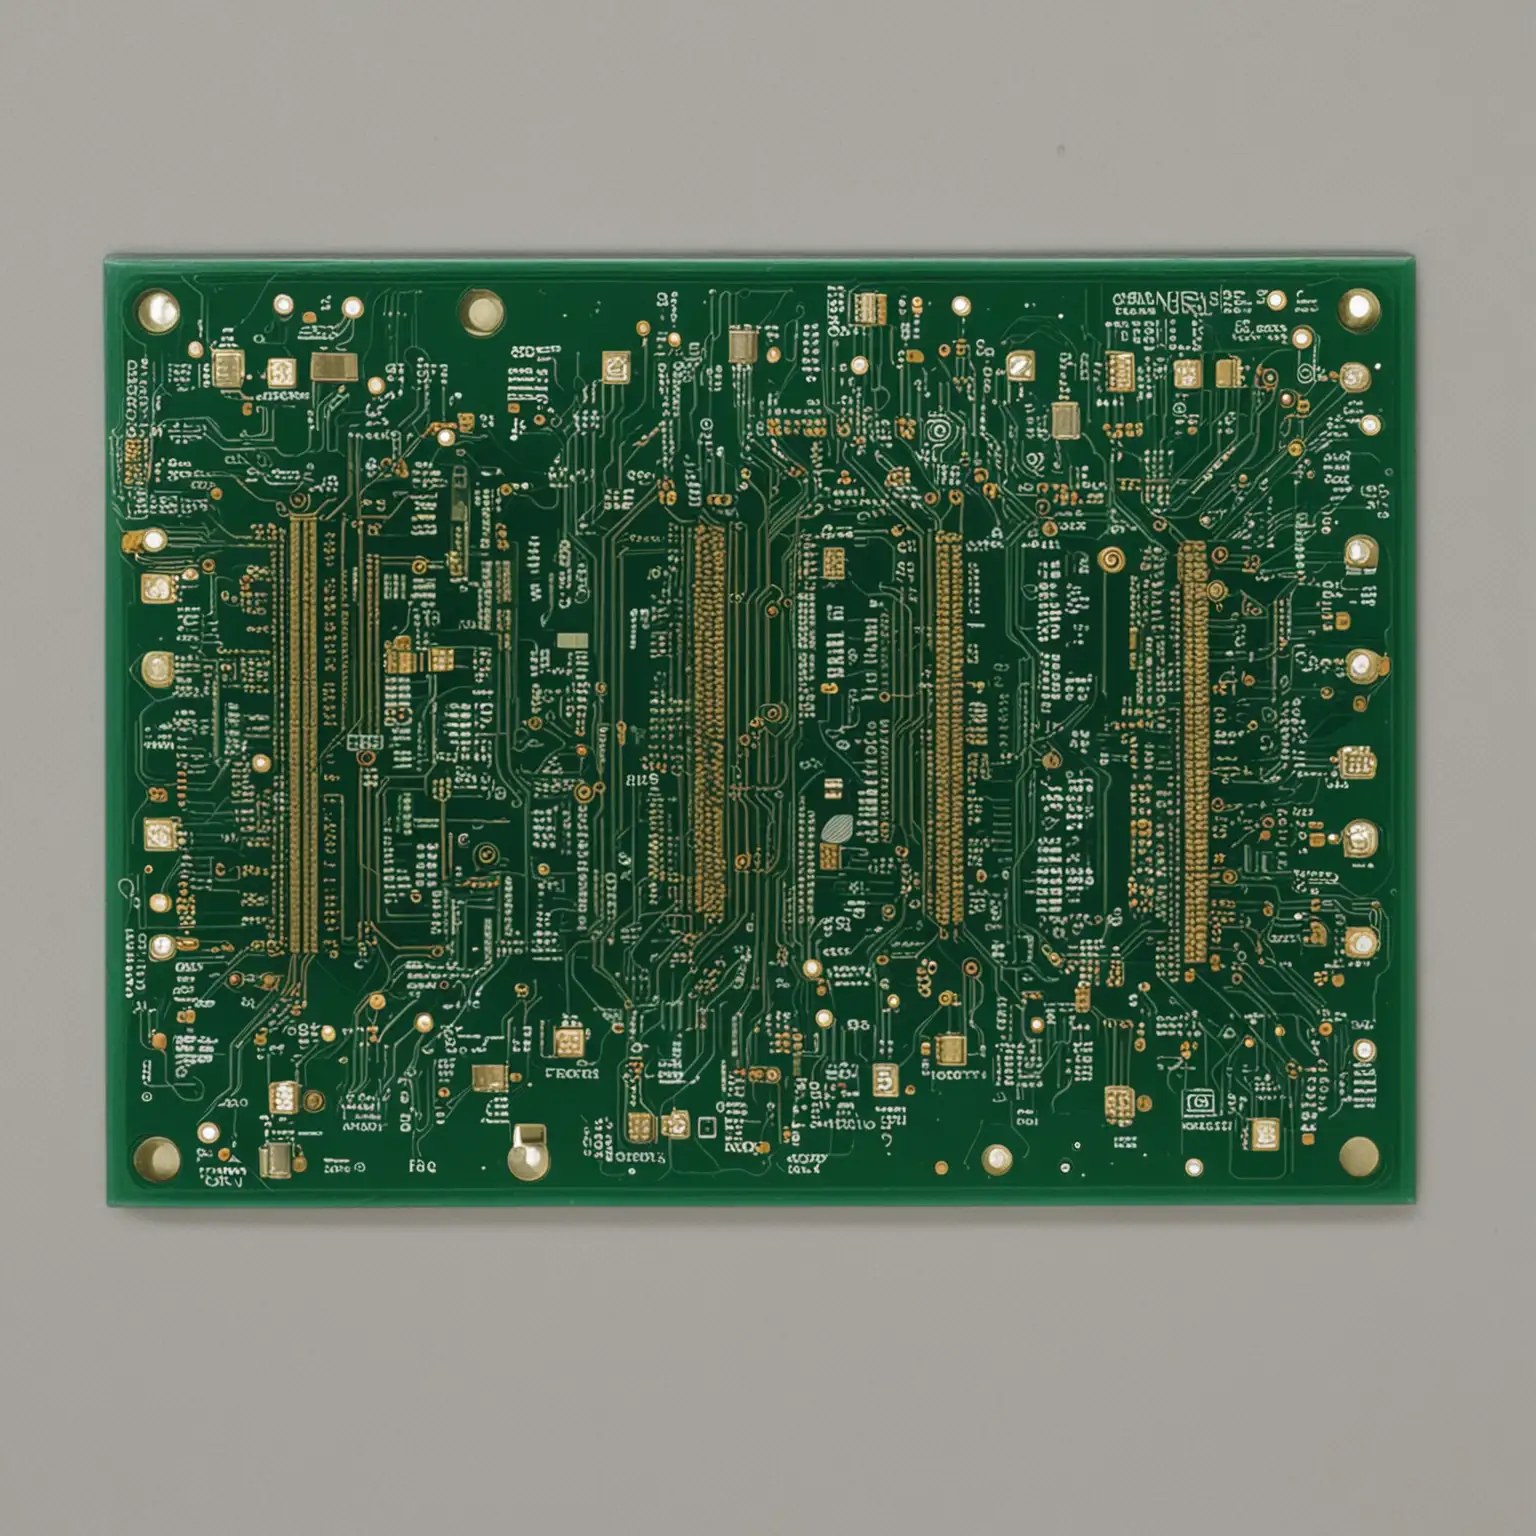 PCB line route board, no components, routes clearly visible